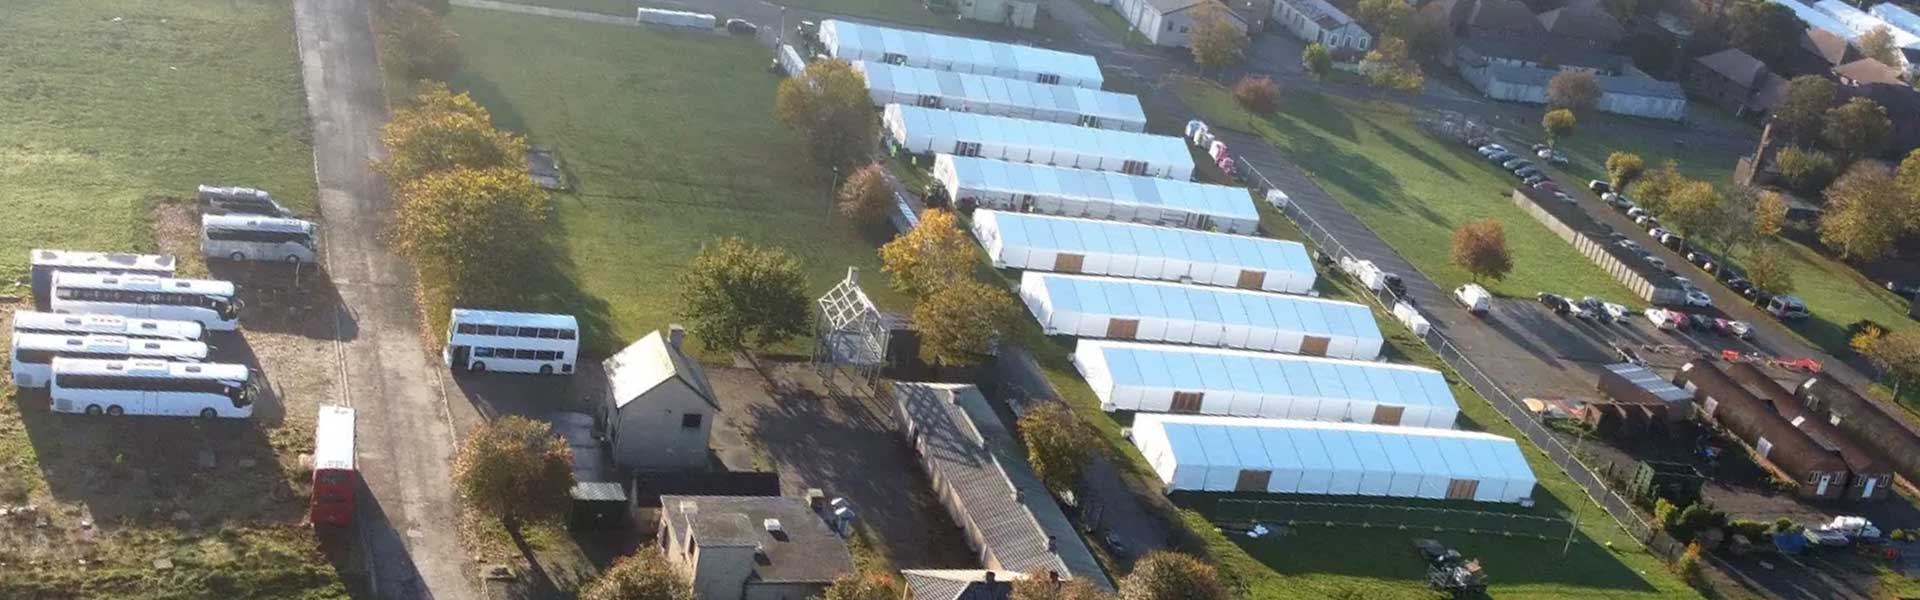 Manston Refugee holding centre seen from the air